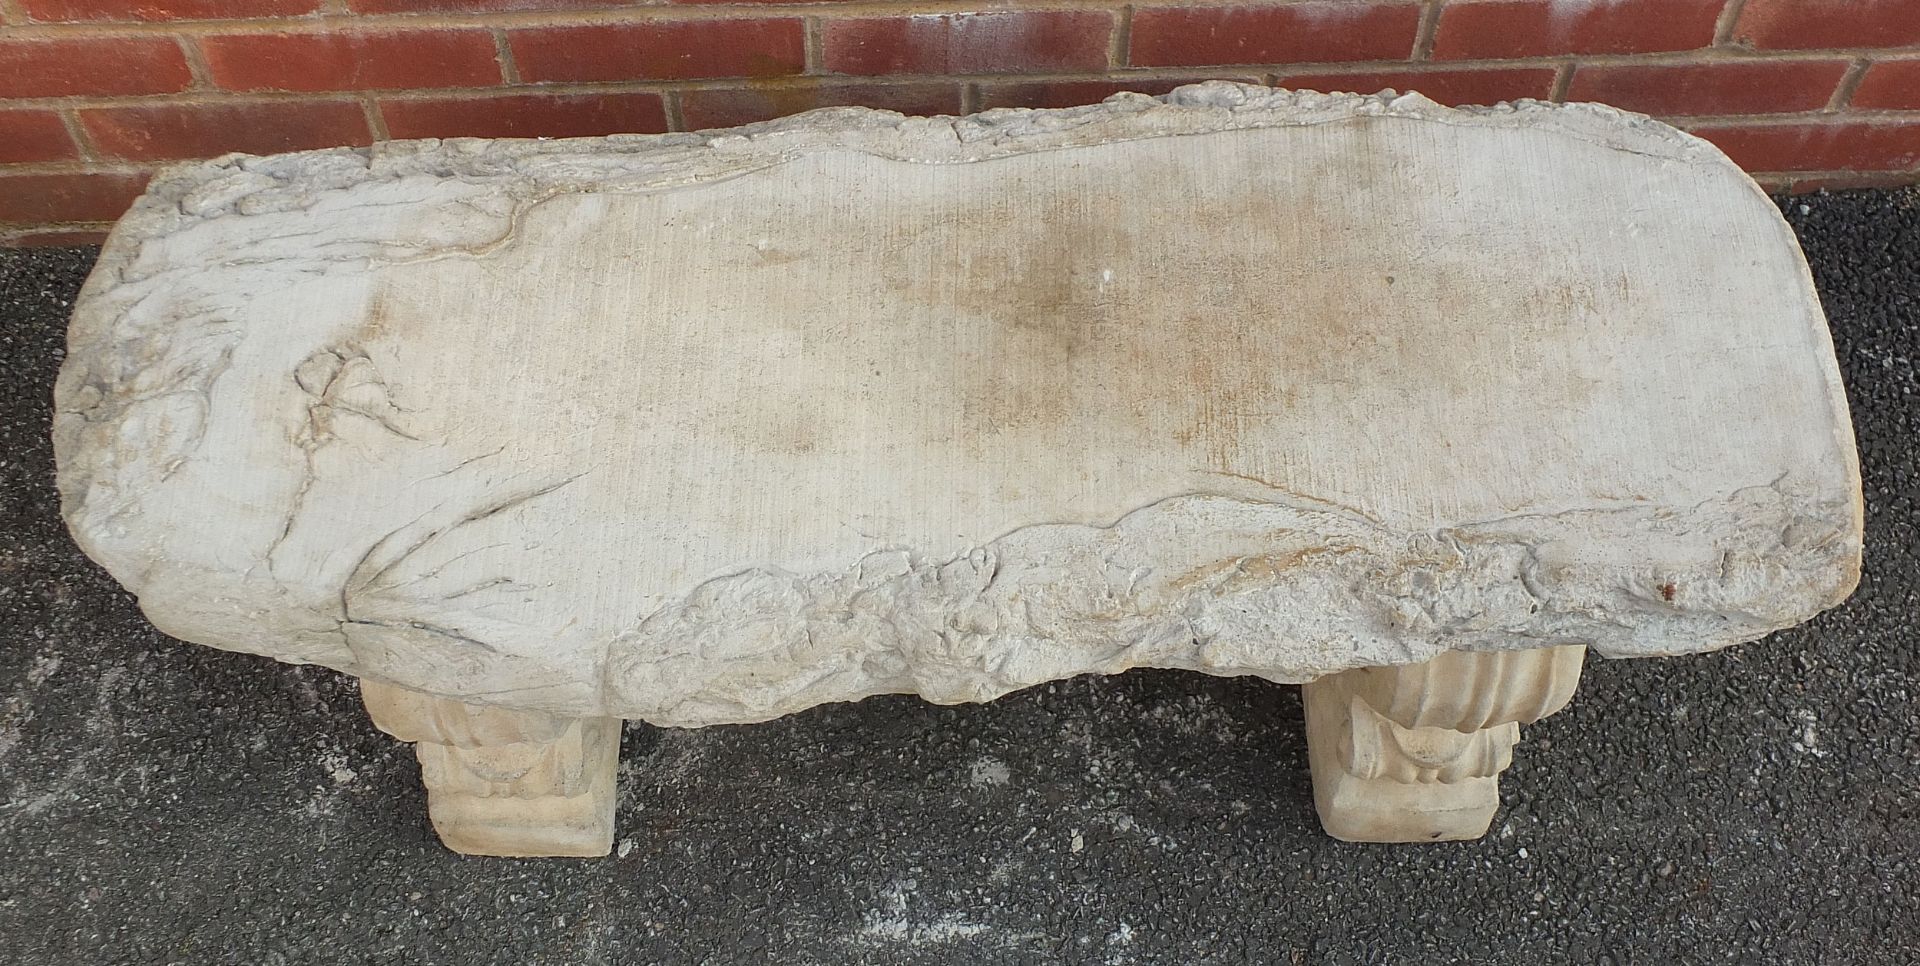 Stoneware garden bench with naturalistic top, 43cm high x 98cm wide - Image 2 of 3